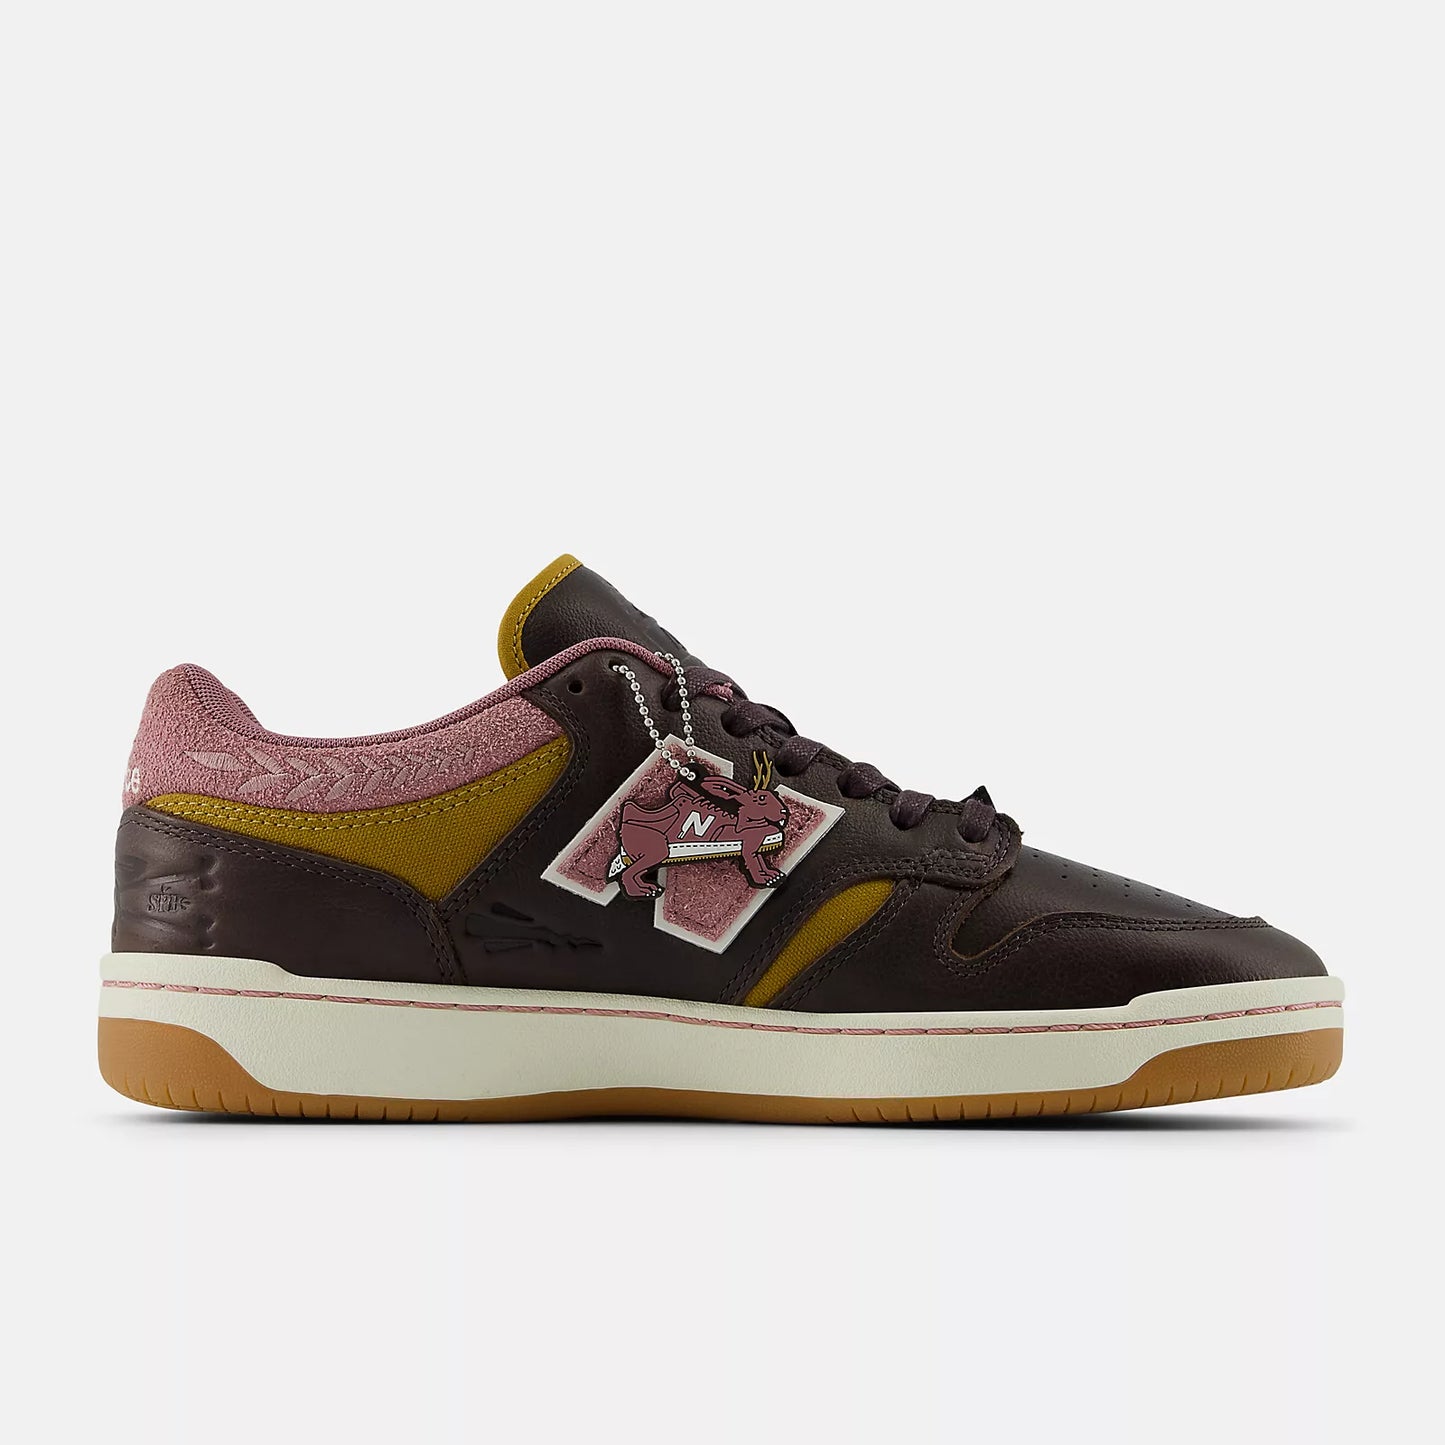 New Balance Numeric 480 x Jeremy Fish 330 - Brown with Pink